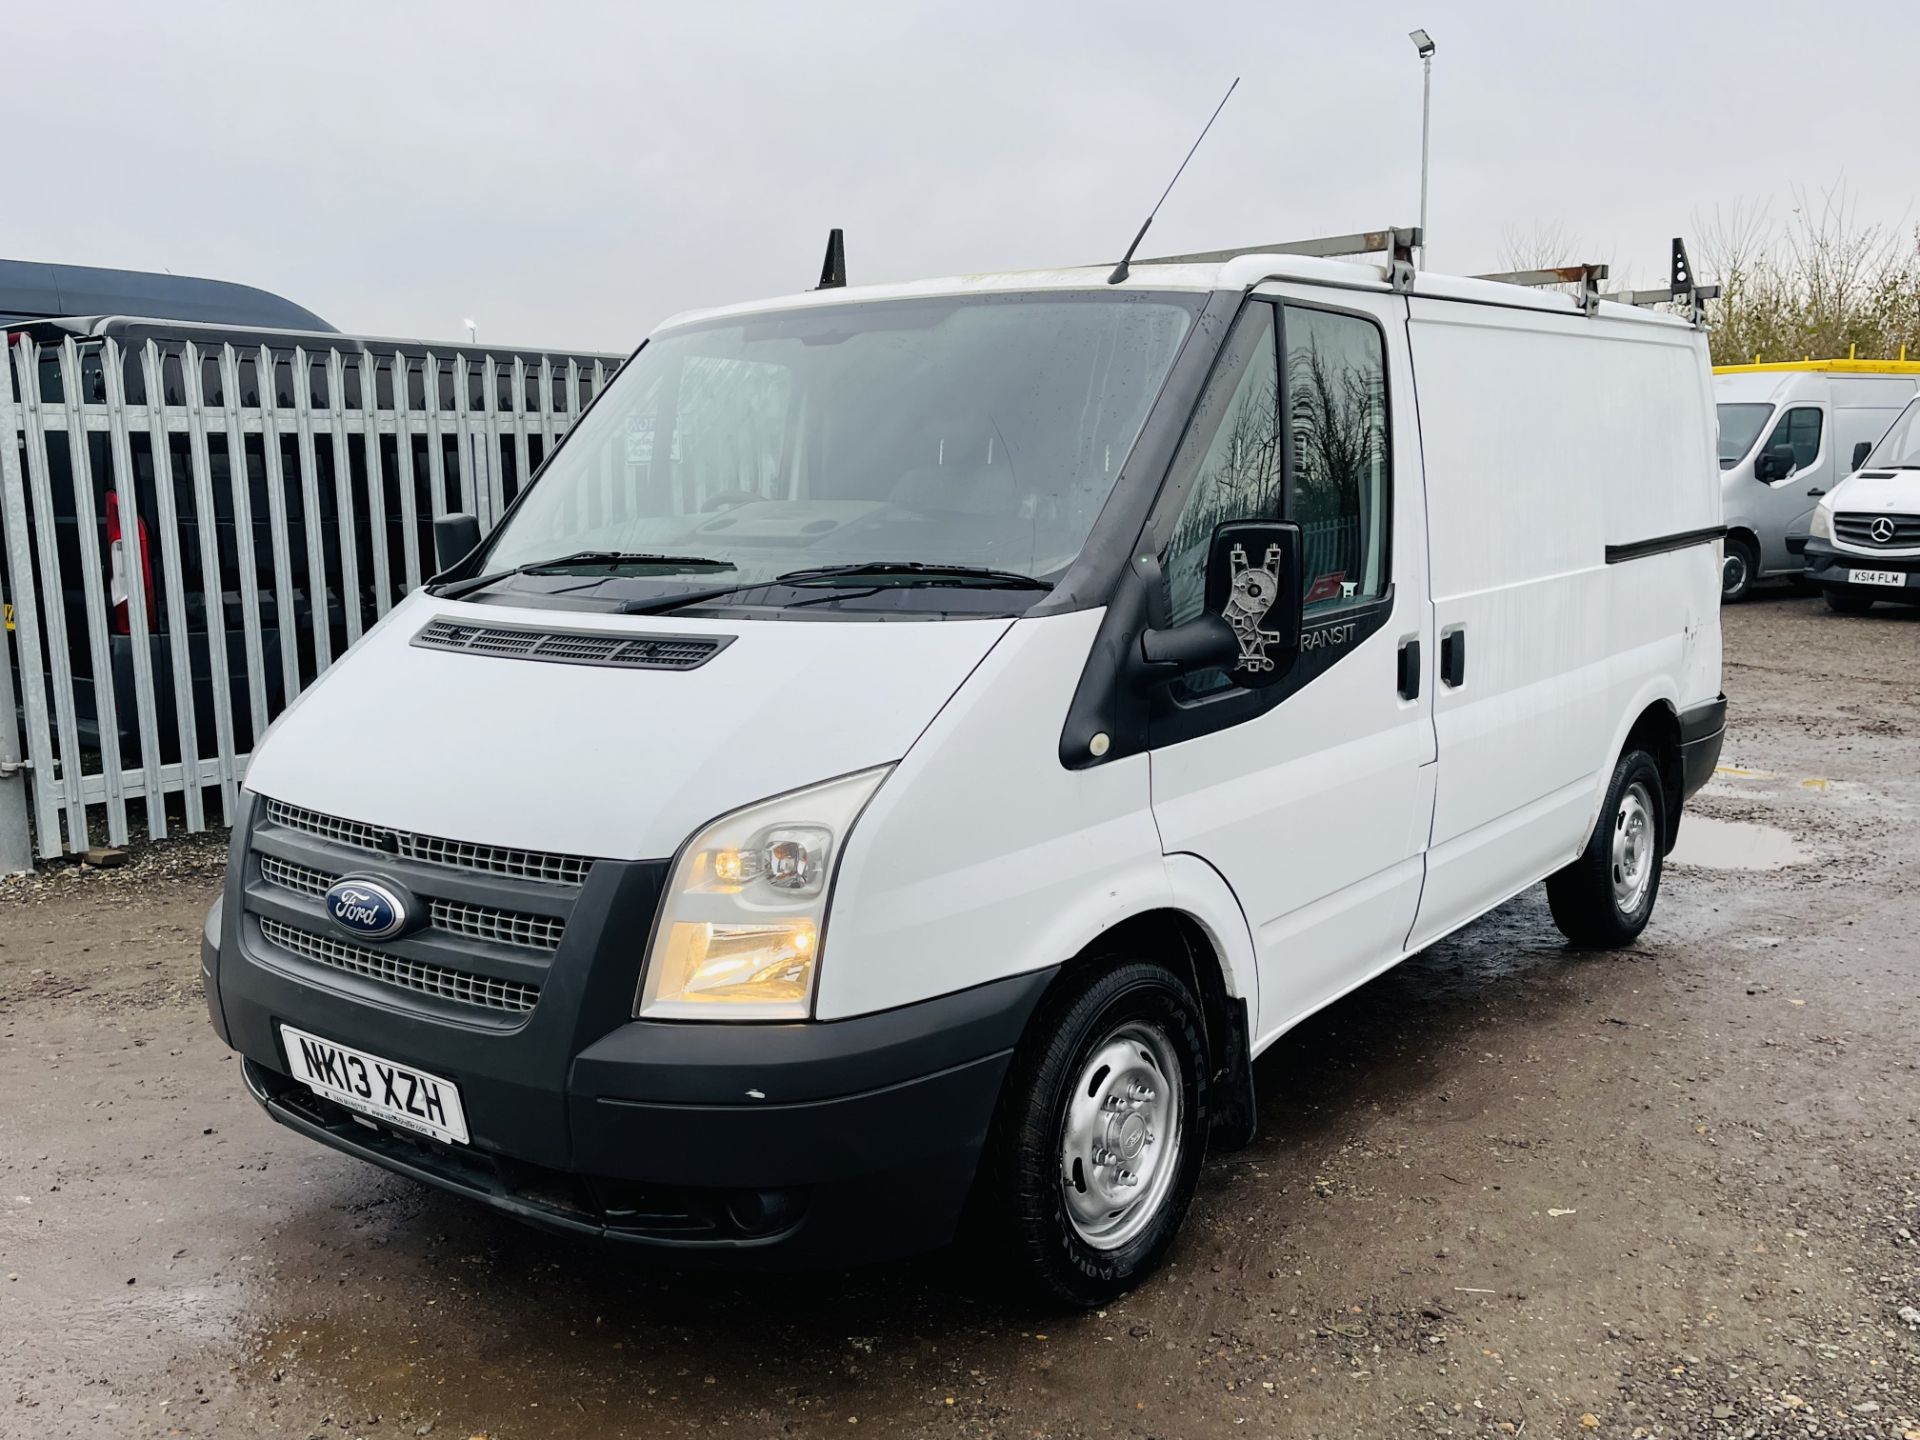 ** ON SALE ** Ford Transit 2.2 TDCI 100 FWD L1 H1 2013 '13 Reg' - Air con - No Vat Save 20% - Image 5 of 21